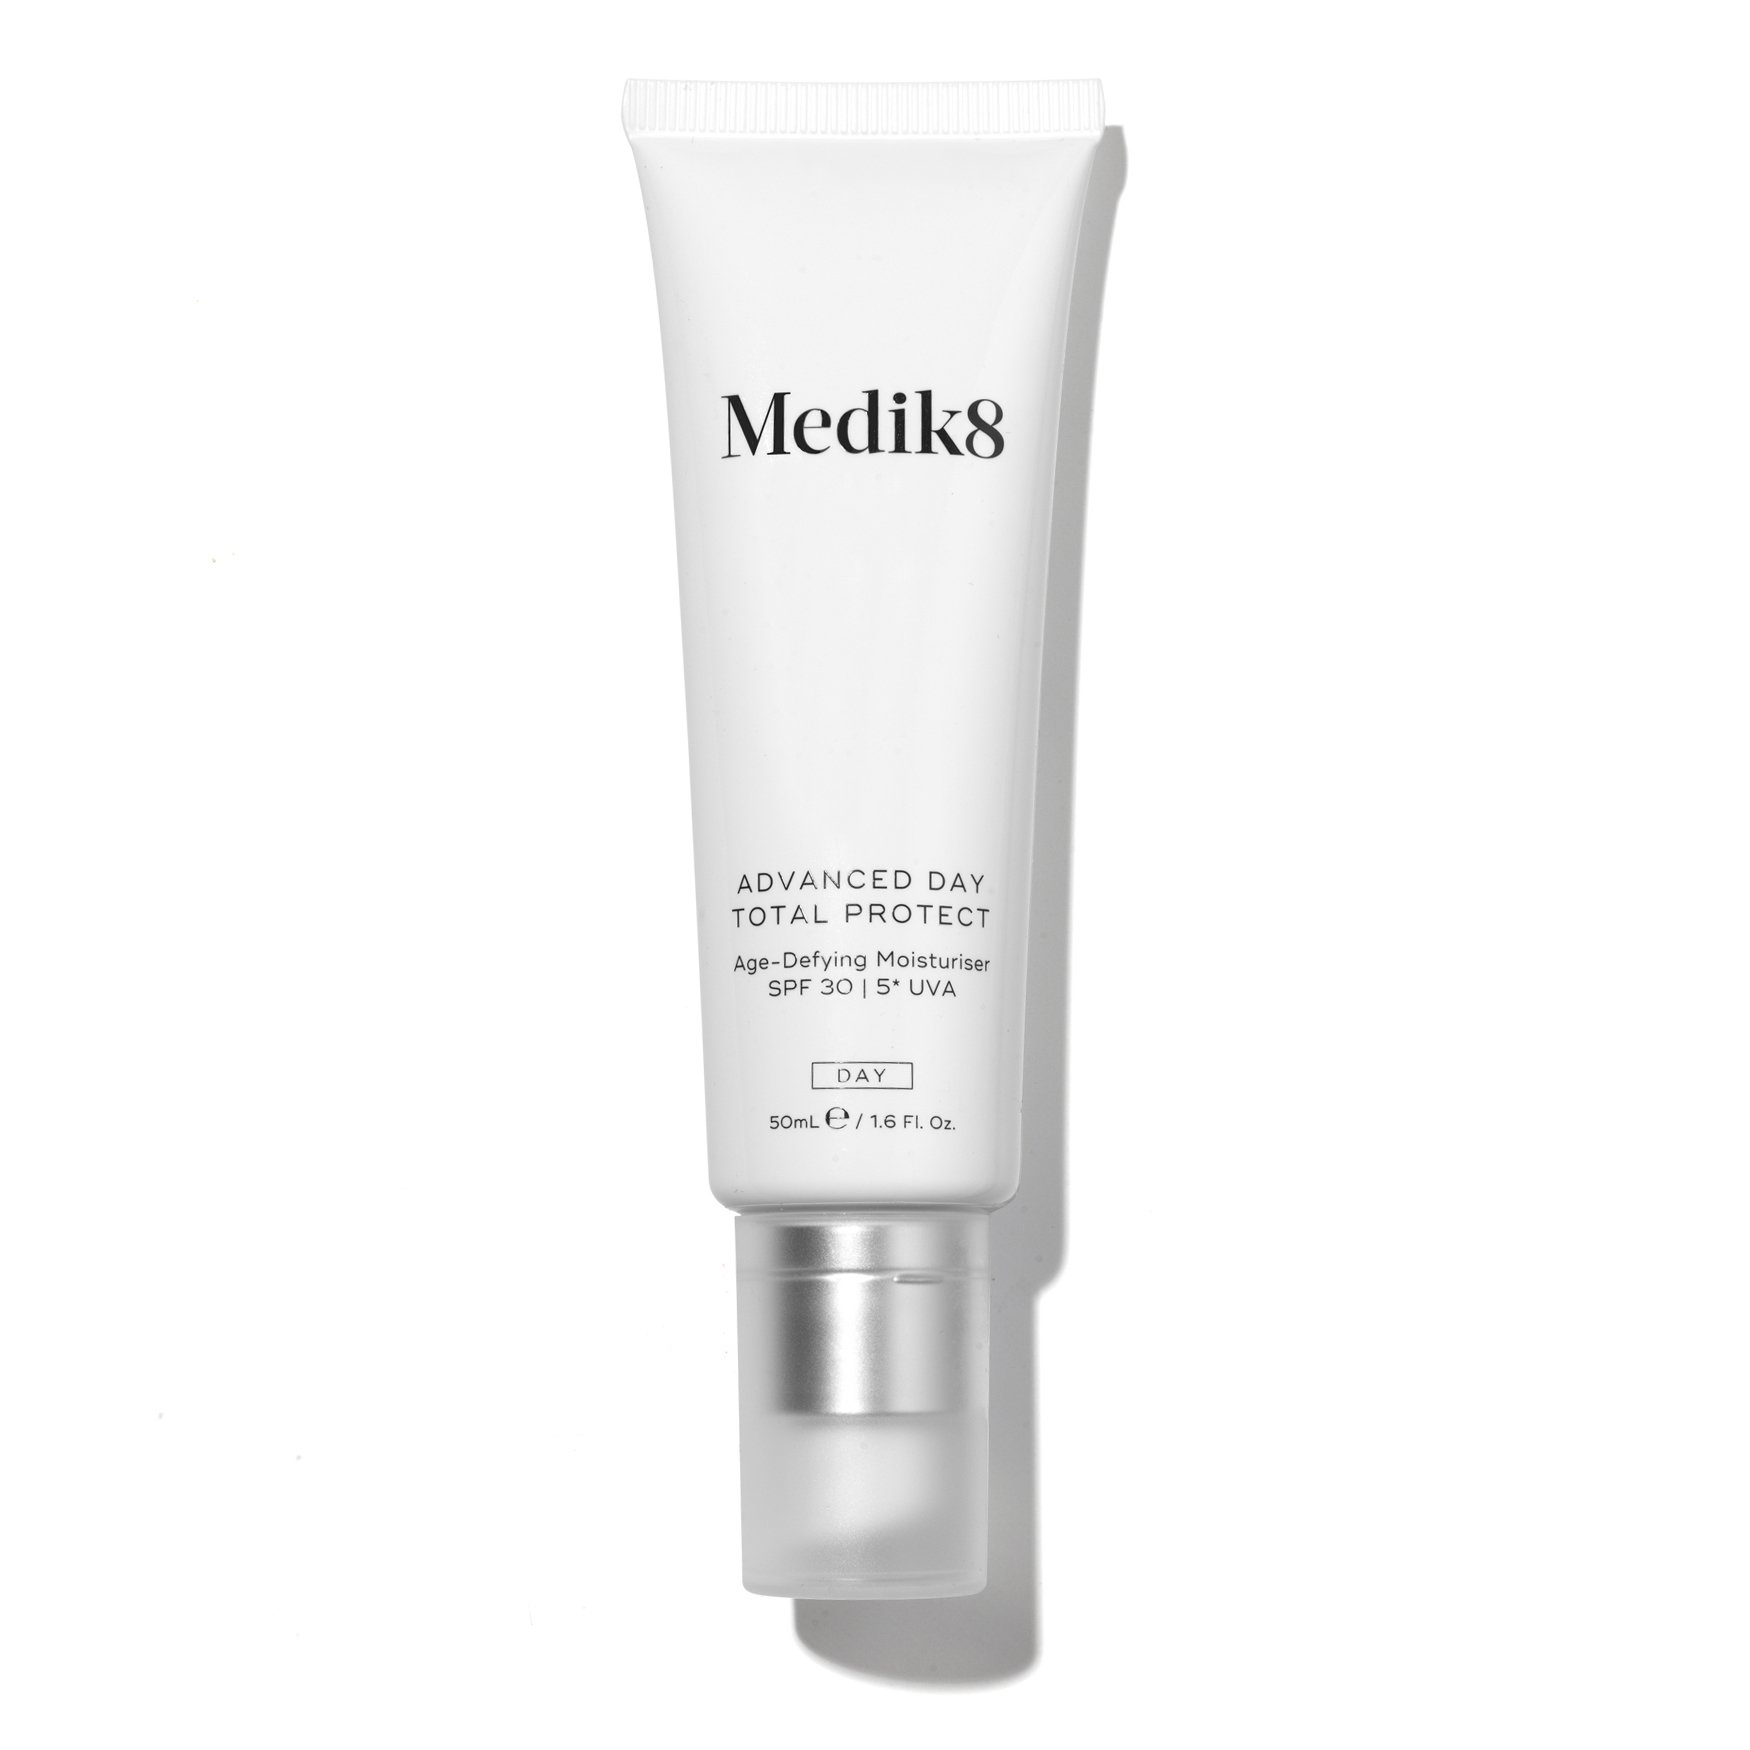 Medik8 Advanced Day Total Protect SPF30 | Space NK